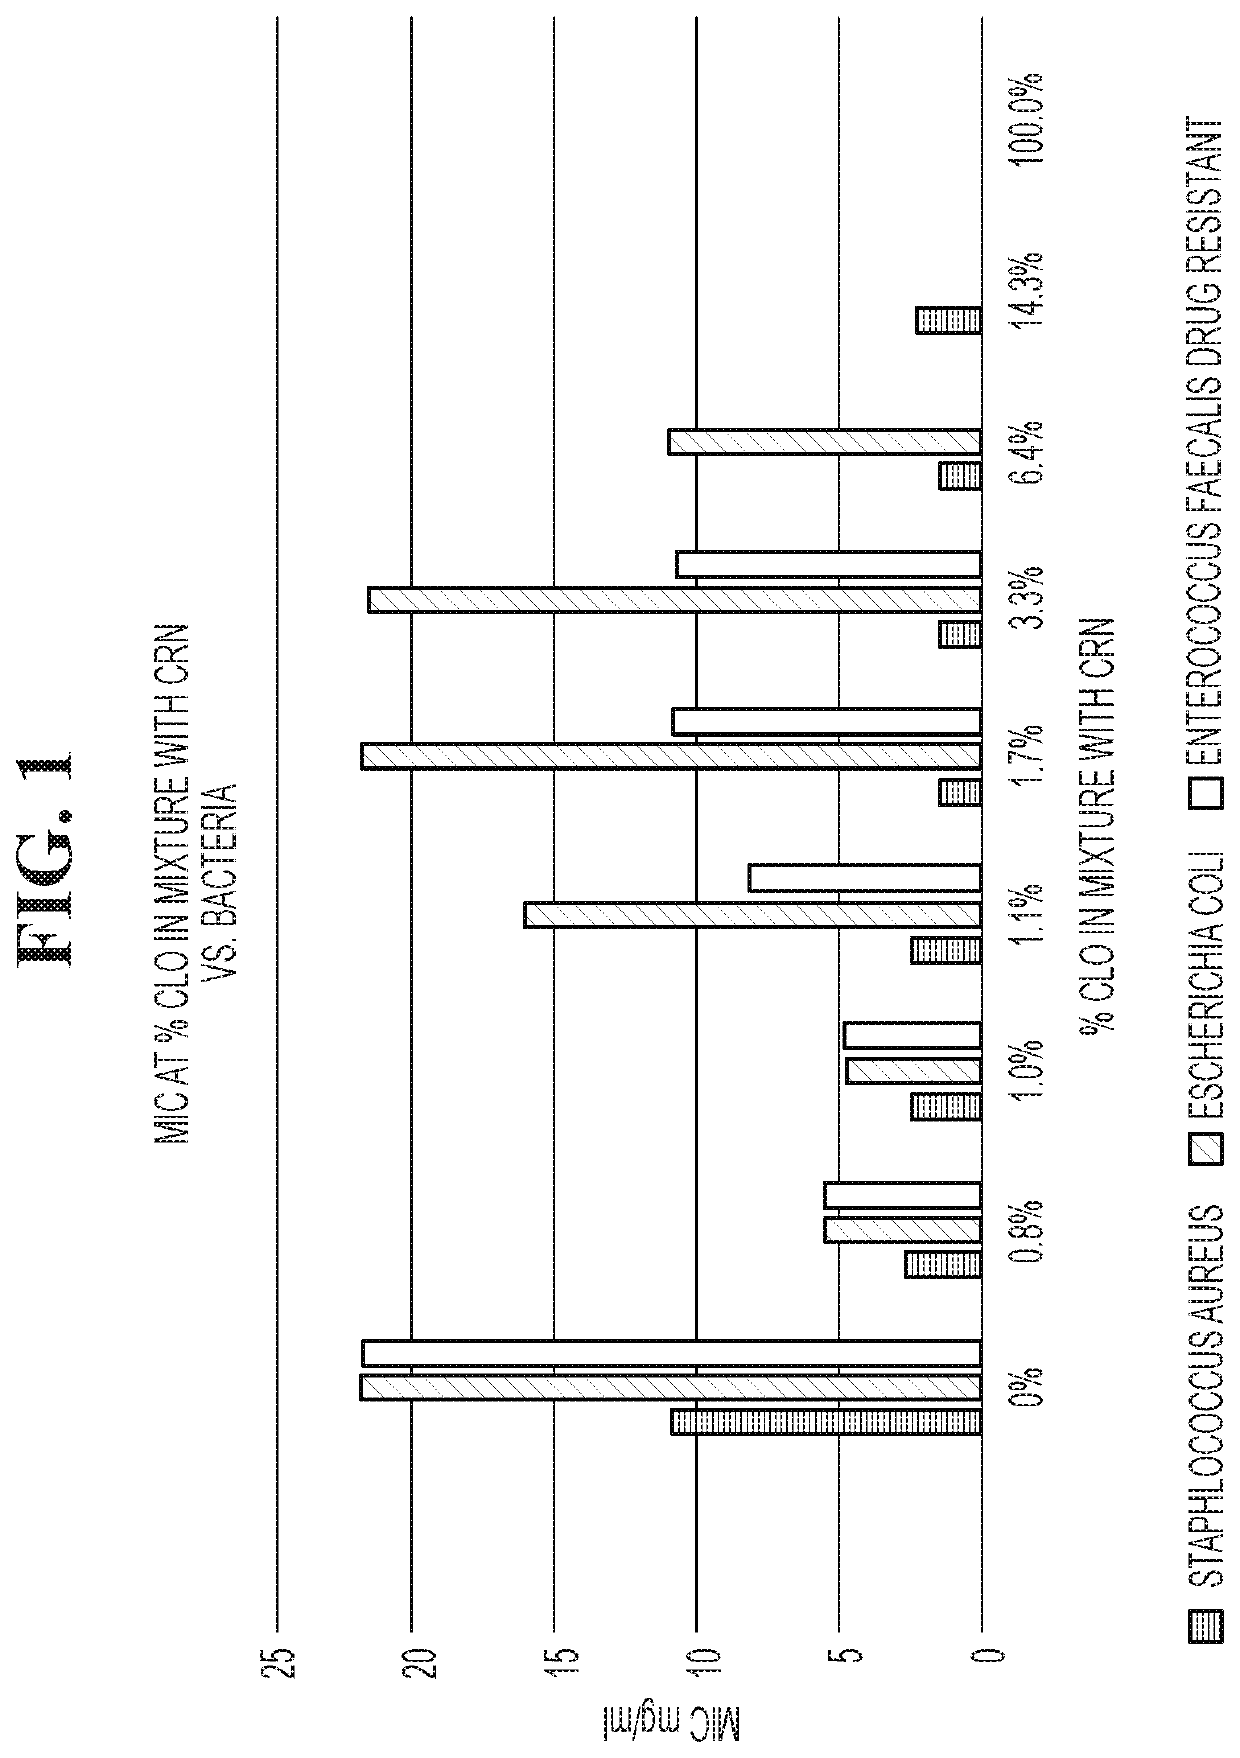 Antimicrobial compositions containing a synergistic combination of activated creatinine and an imidazole antifungal agent